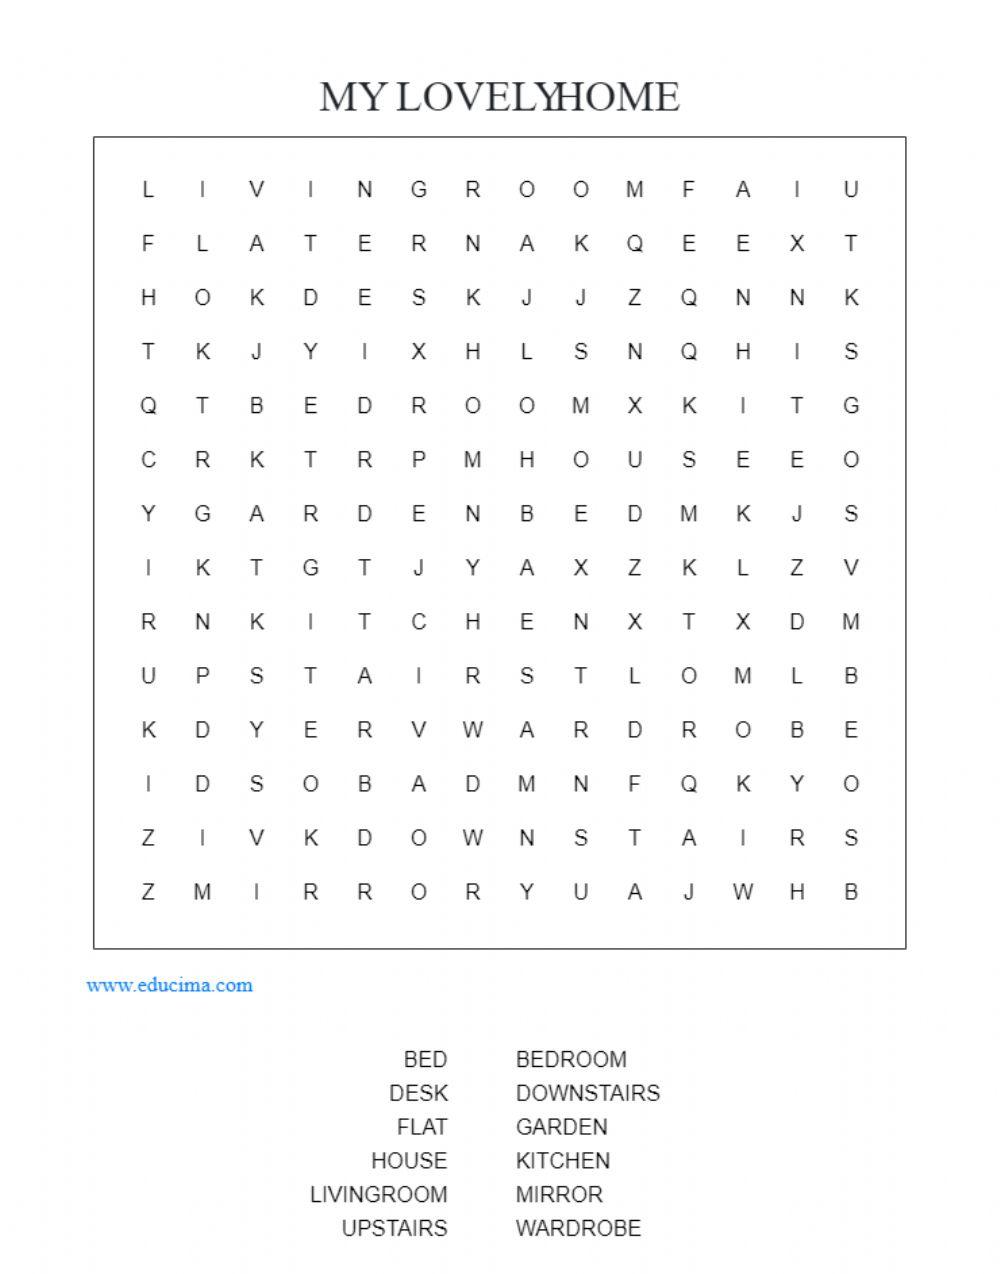 My lovely home: wordsearch